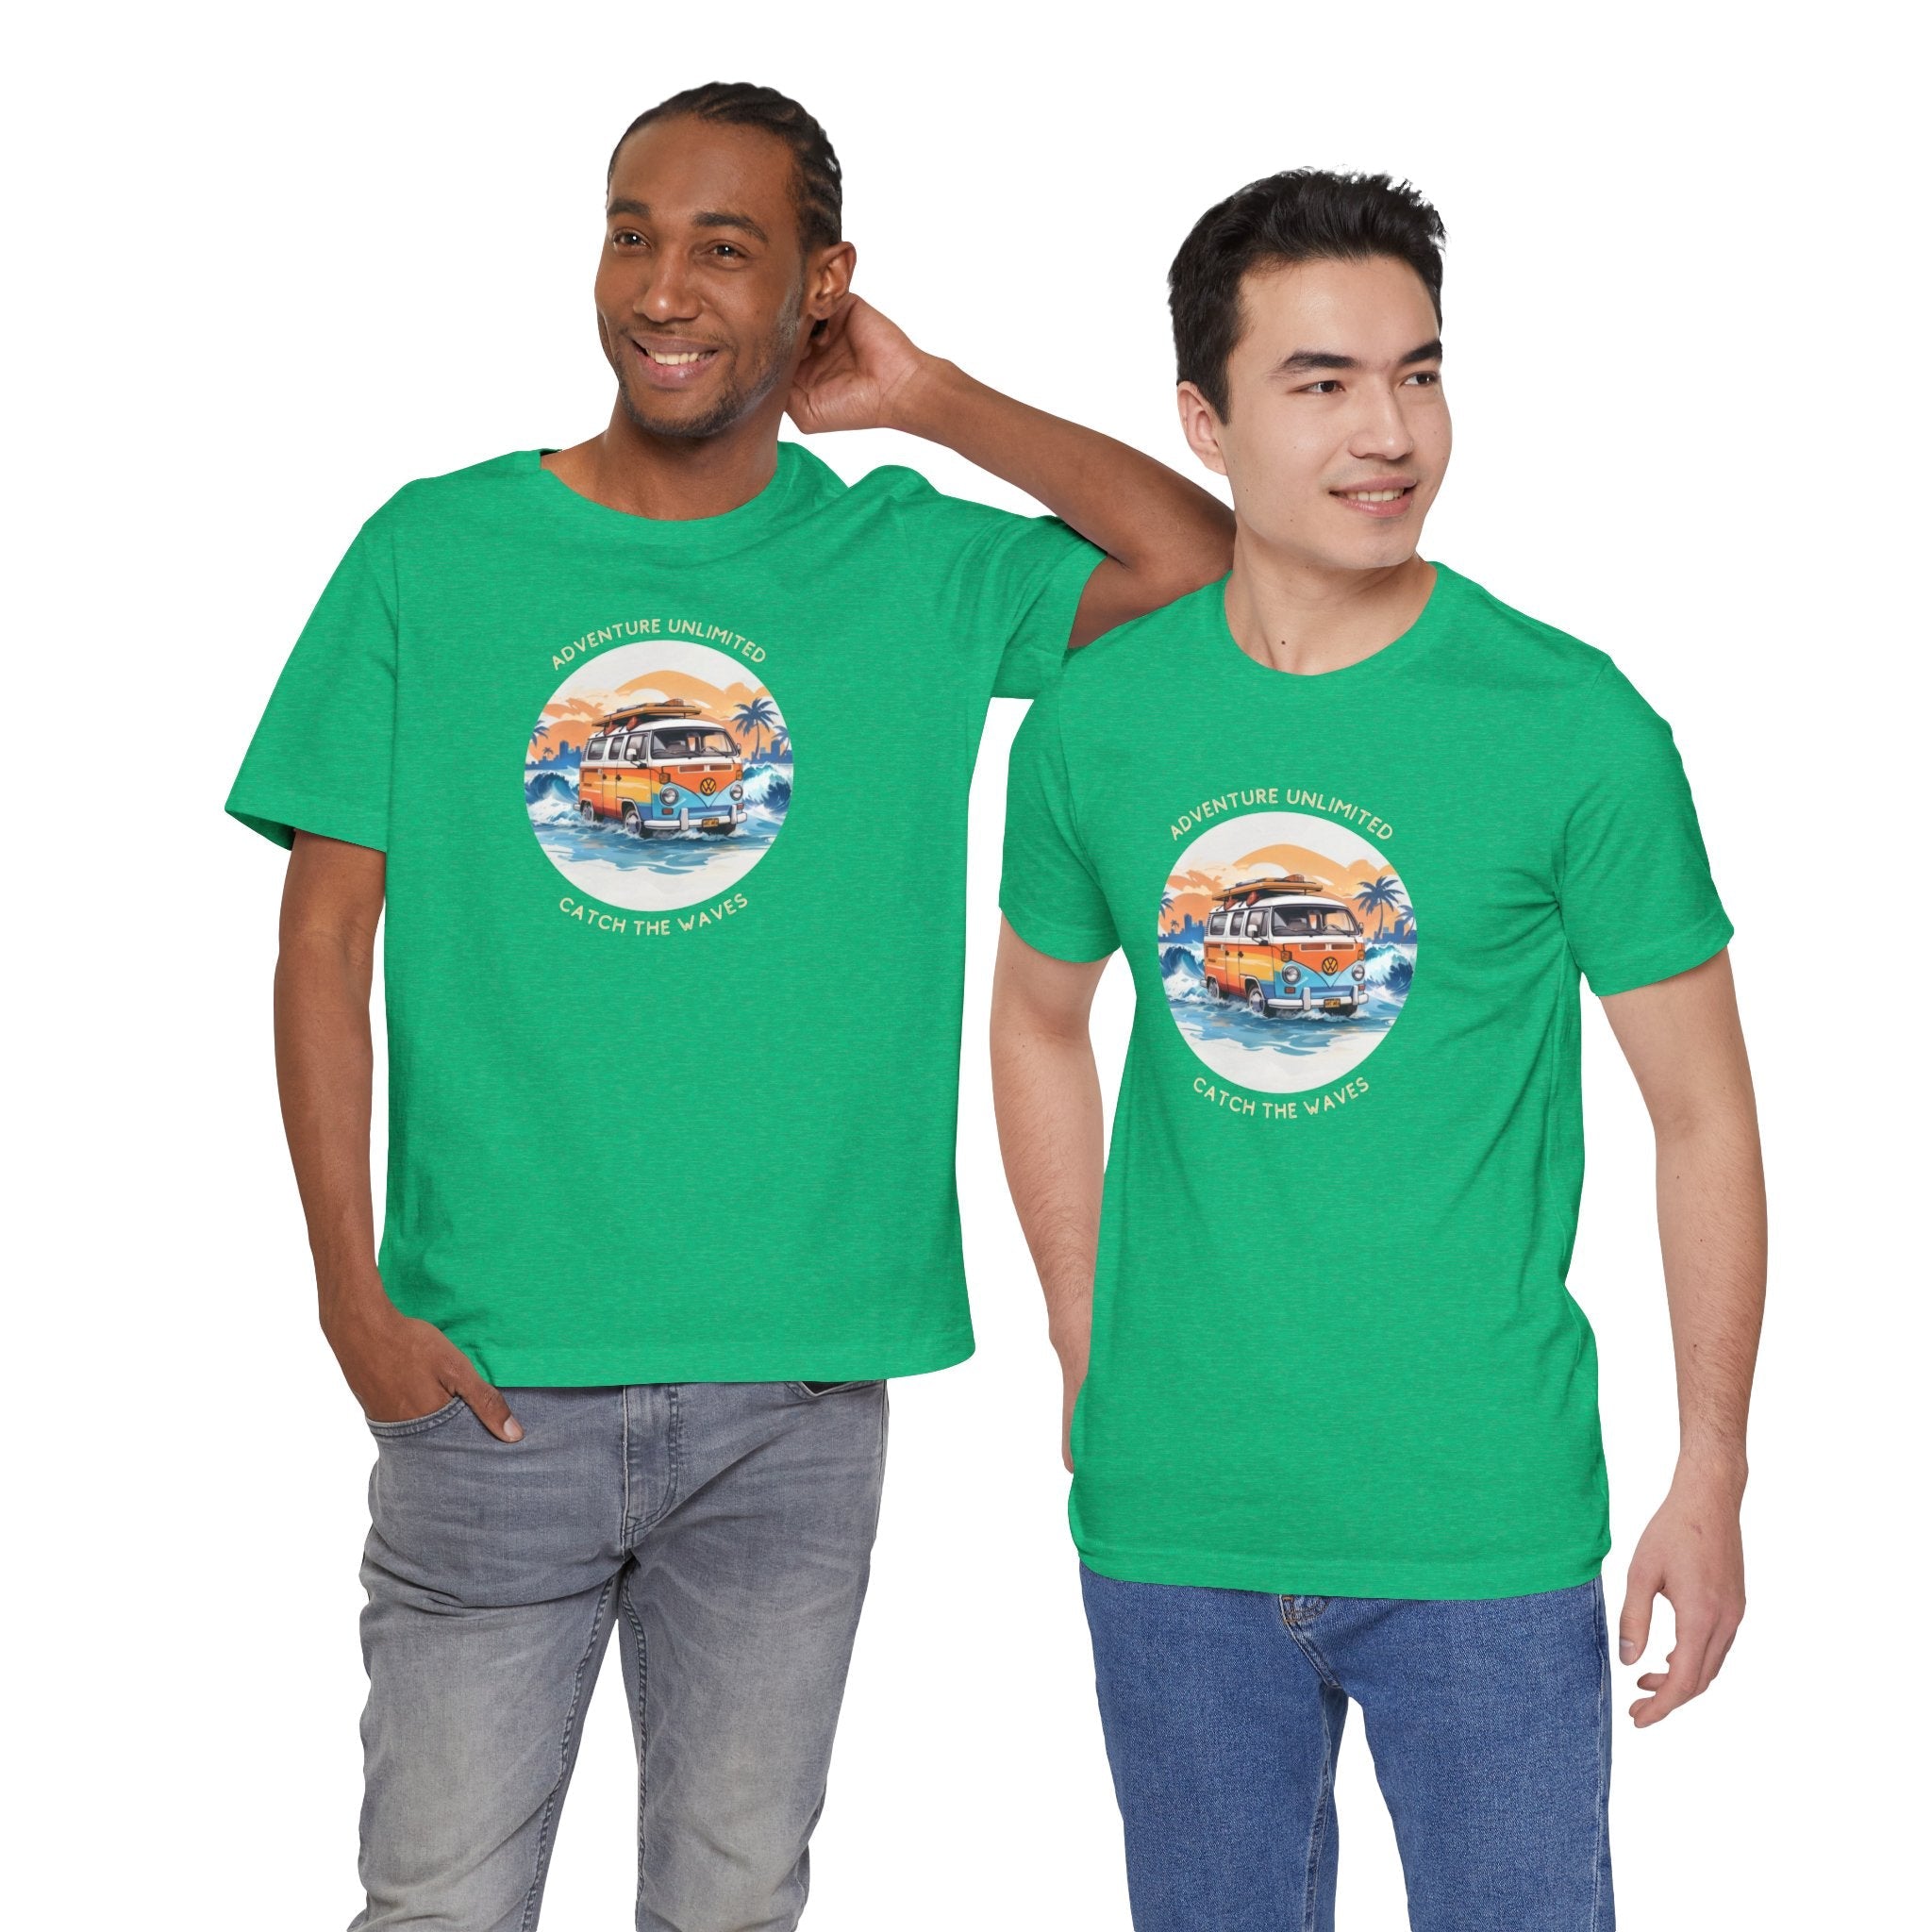 Adventure Unlimited green printed ’I love you’ unisex tee - direct-to-garment item worn by two men